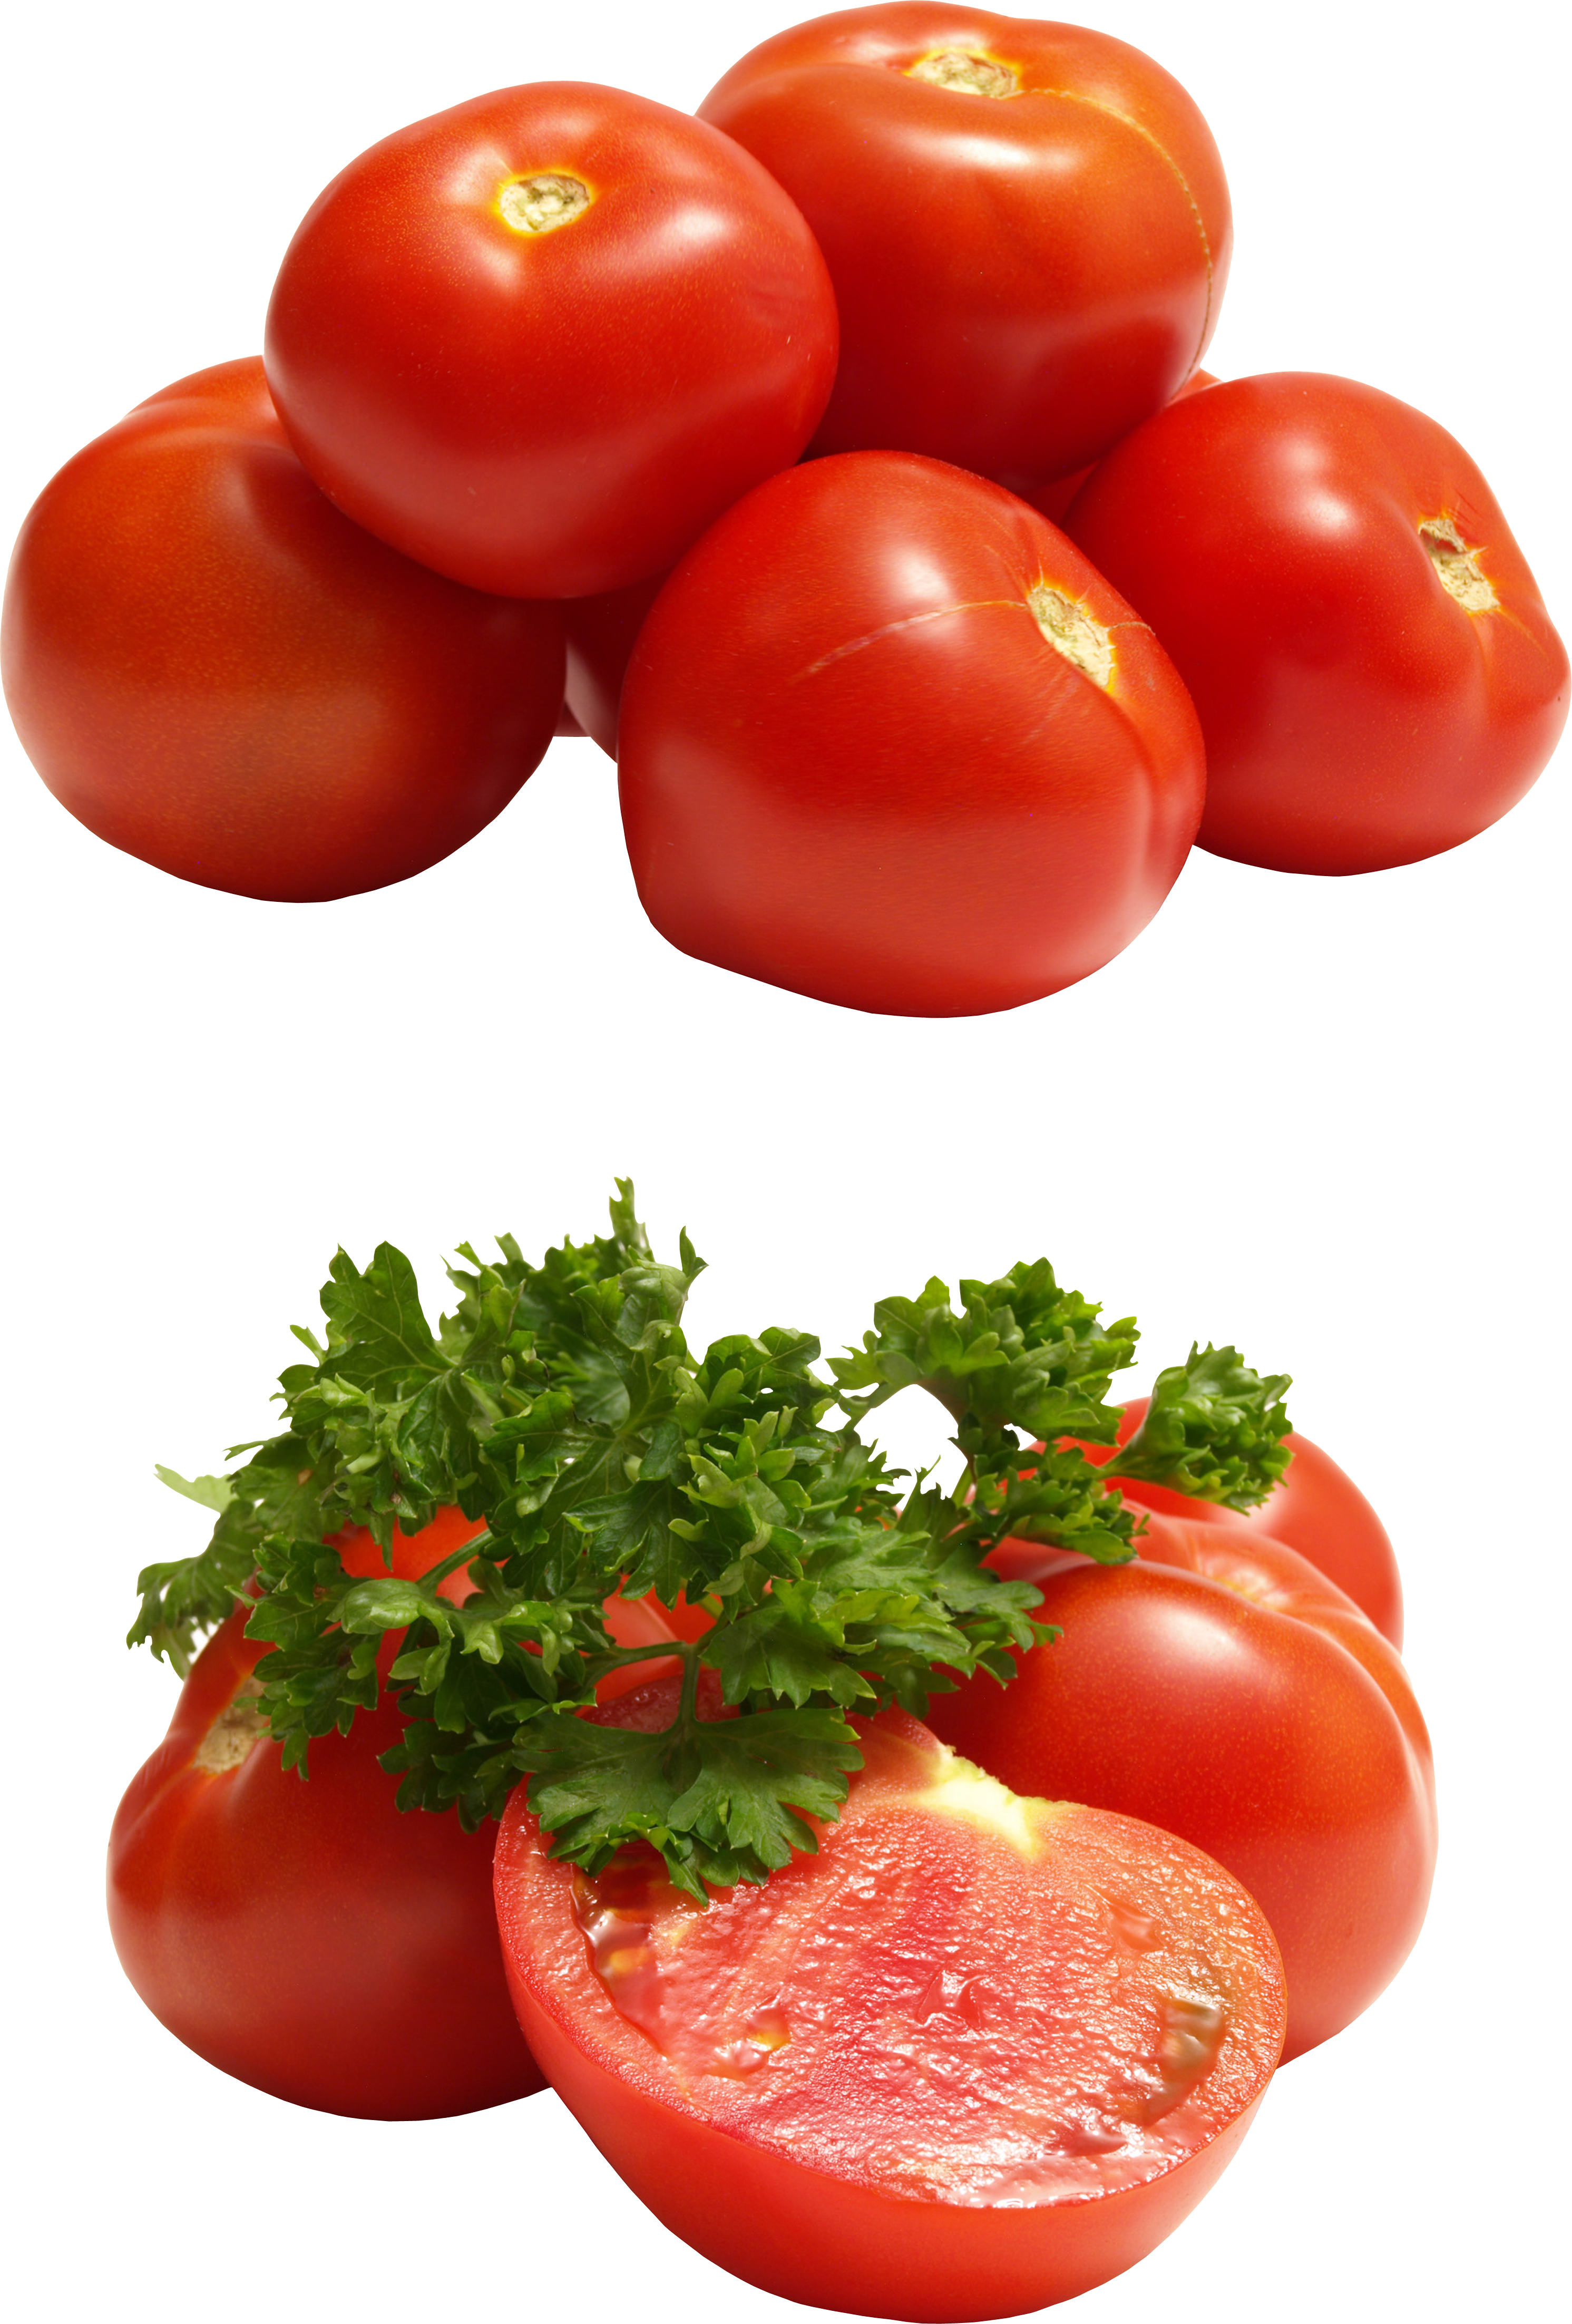 Red Tomatoes PNG Image - PurePNG | Free transparent CC0 PNG Image Library